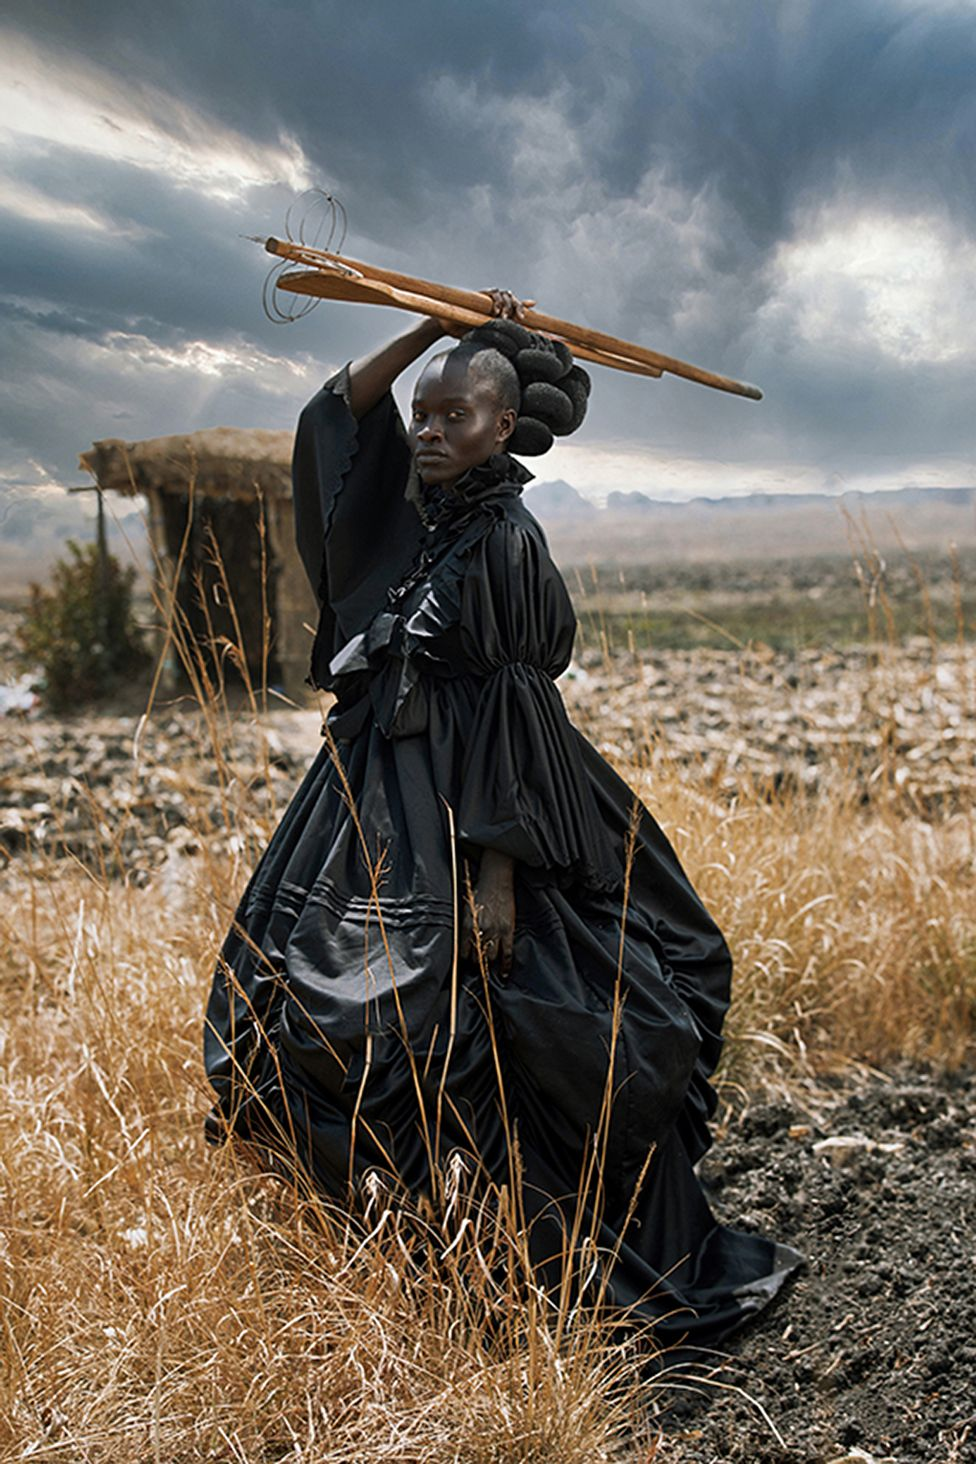 Tamary Kudita, from Zimbabwe, for her portrait of a young women dressed in Victorian clothing, holding traditional Shona cooking utensils called African Victorian. won the opne competition